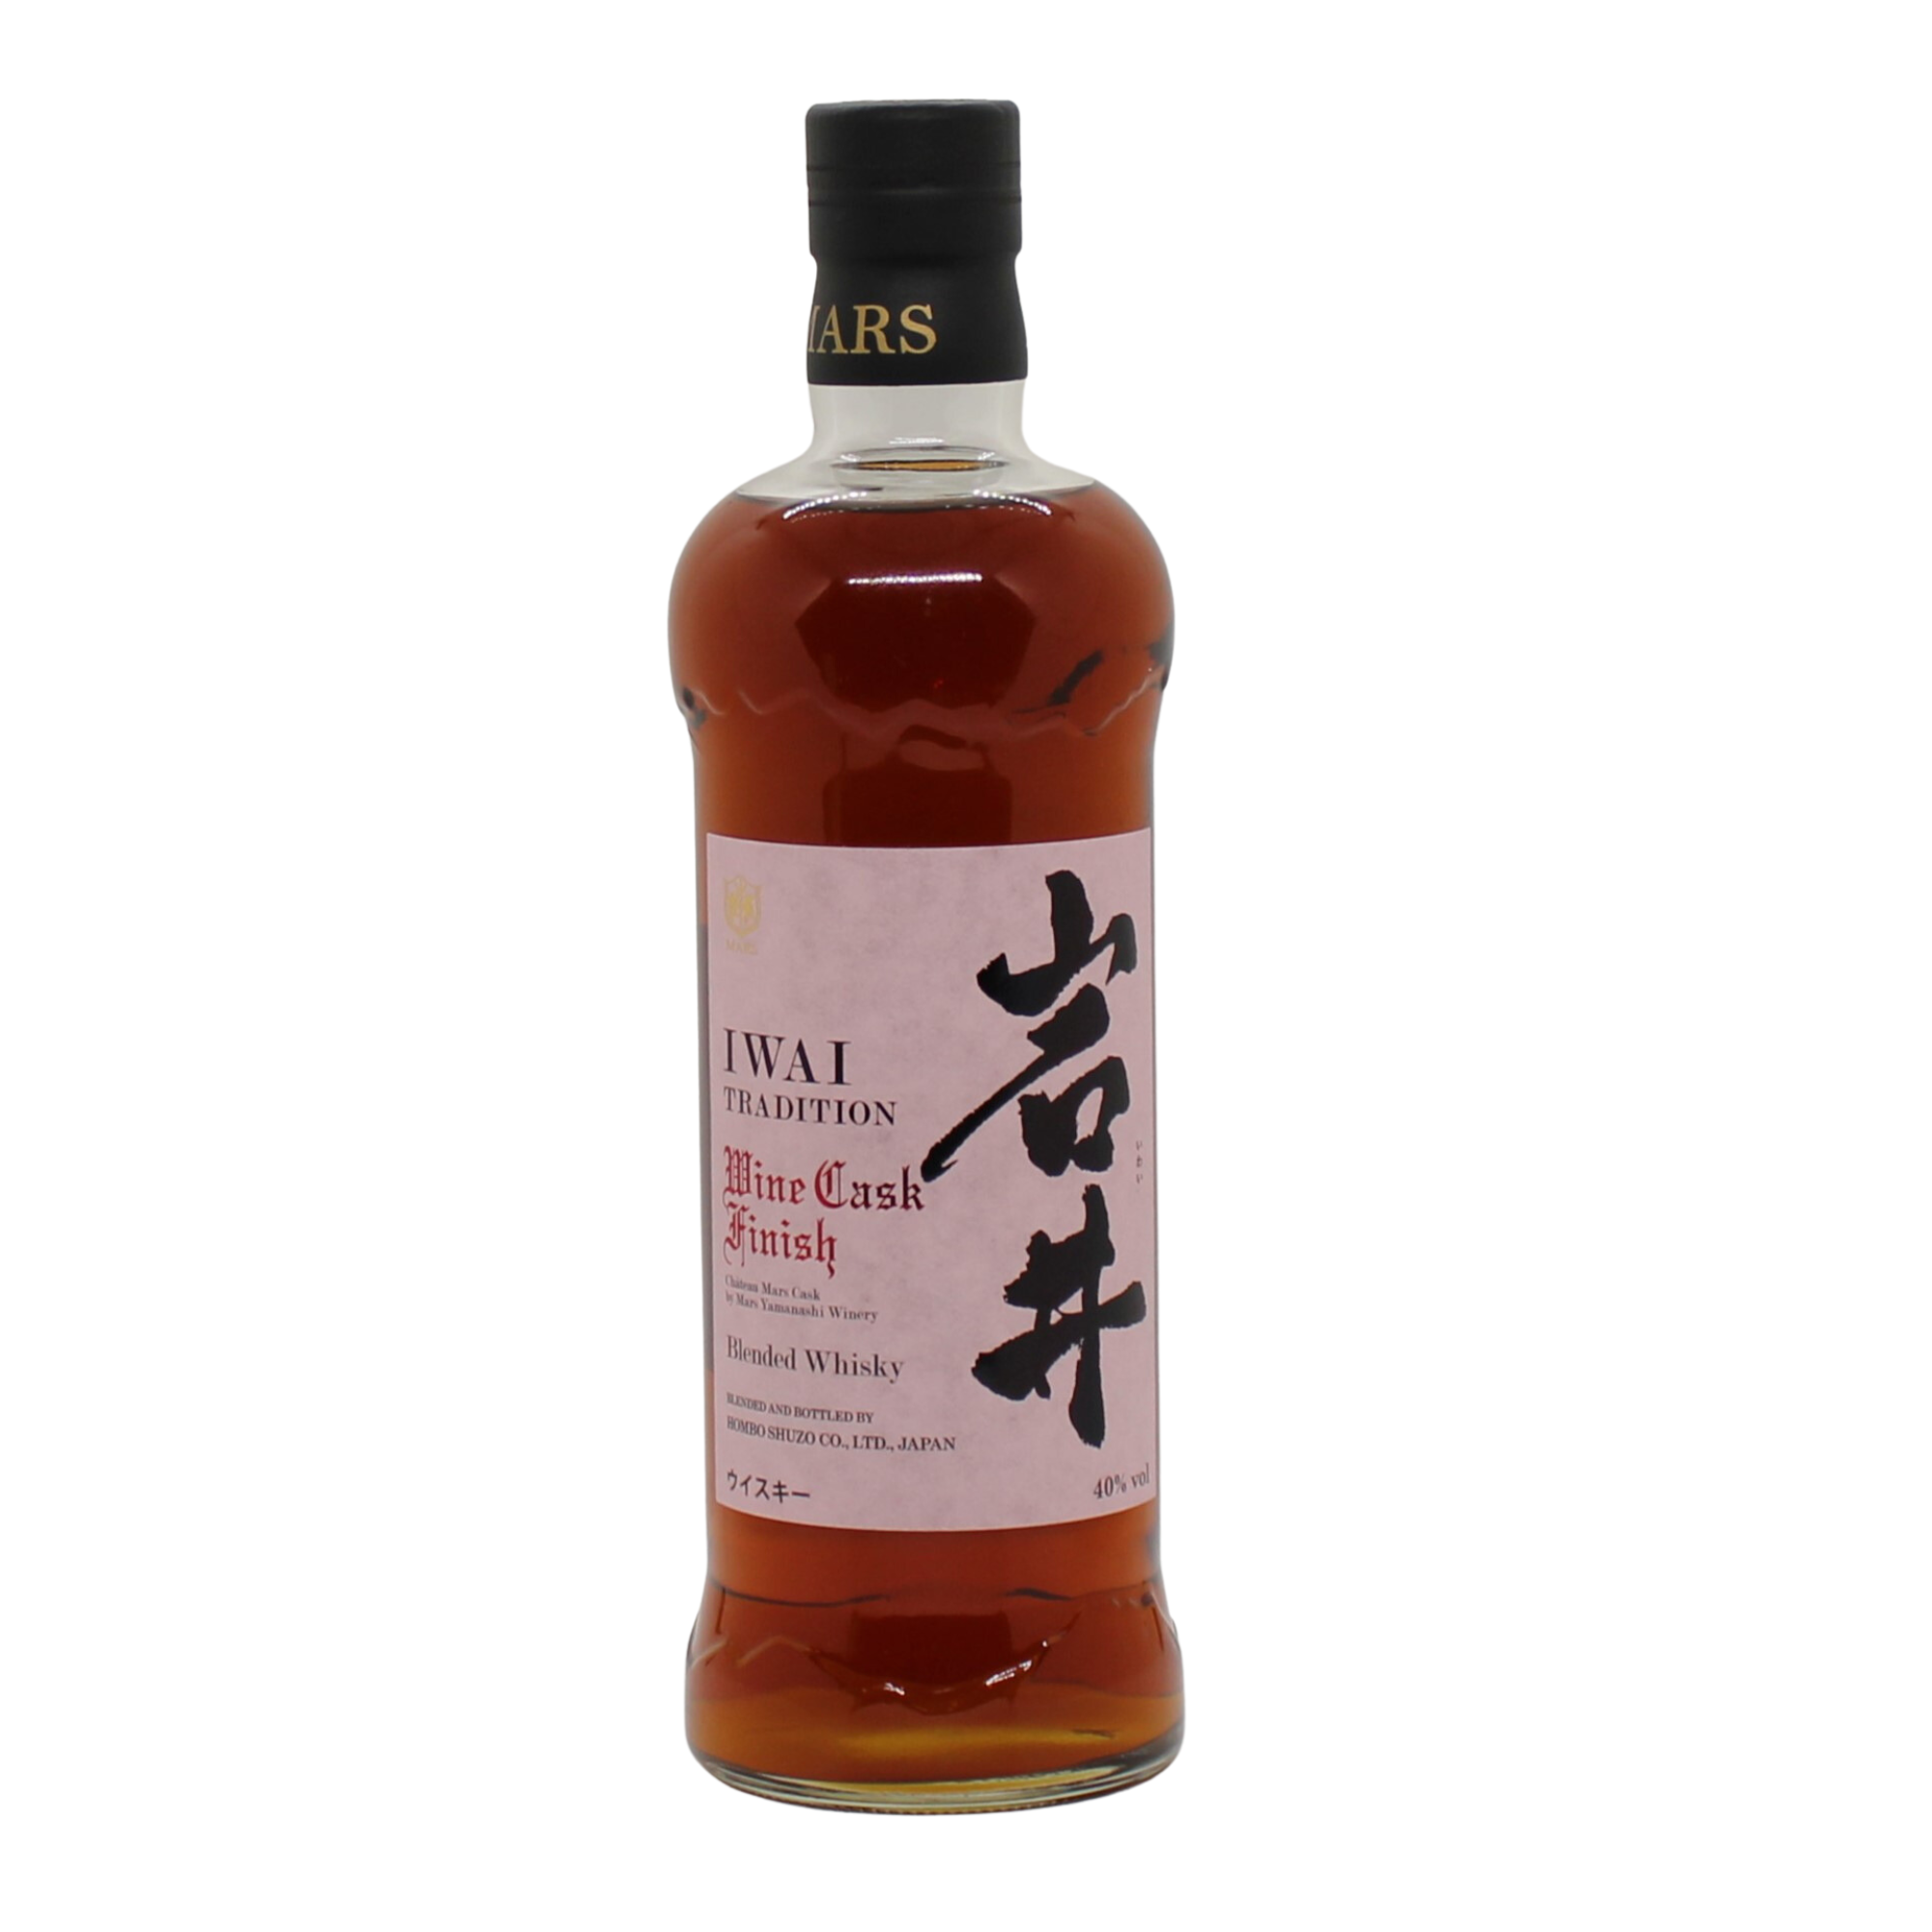 Produced by Hombo Shuzo, which also has a winery in Yamanashi Prefecture in Japan. This Whisky has been finished in their own Chateau Mars red wine barrels for more than a year. 